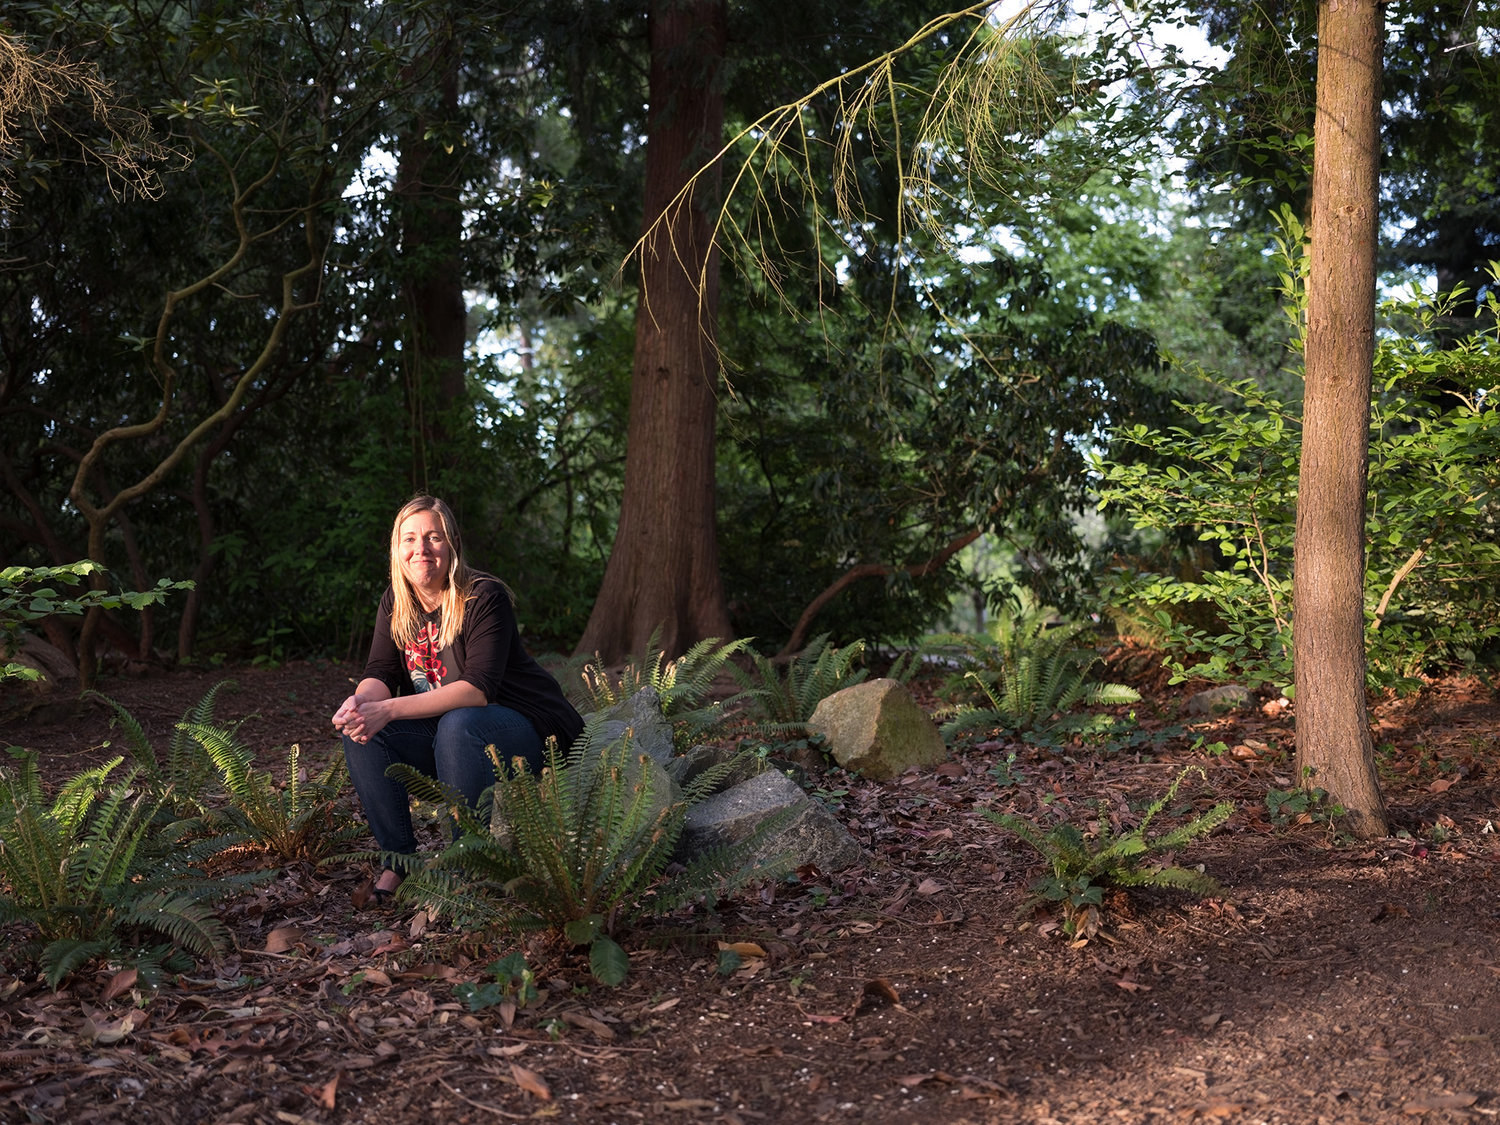 Human composting activist Nina Schoen, a Seattle media tech executive, wants her body to "turn into something that can regenerate life." (Karen Ducey/Los Angeles Times/TNS) 